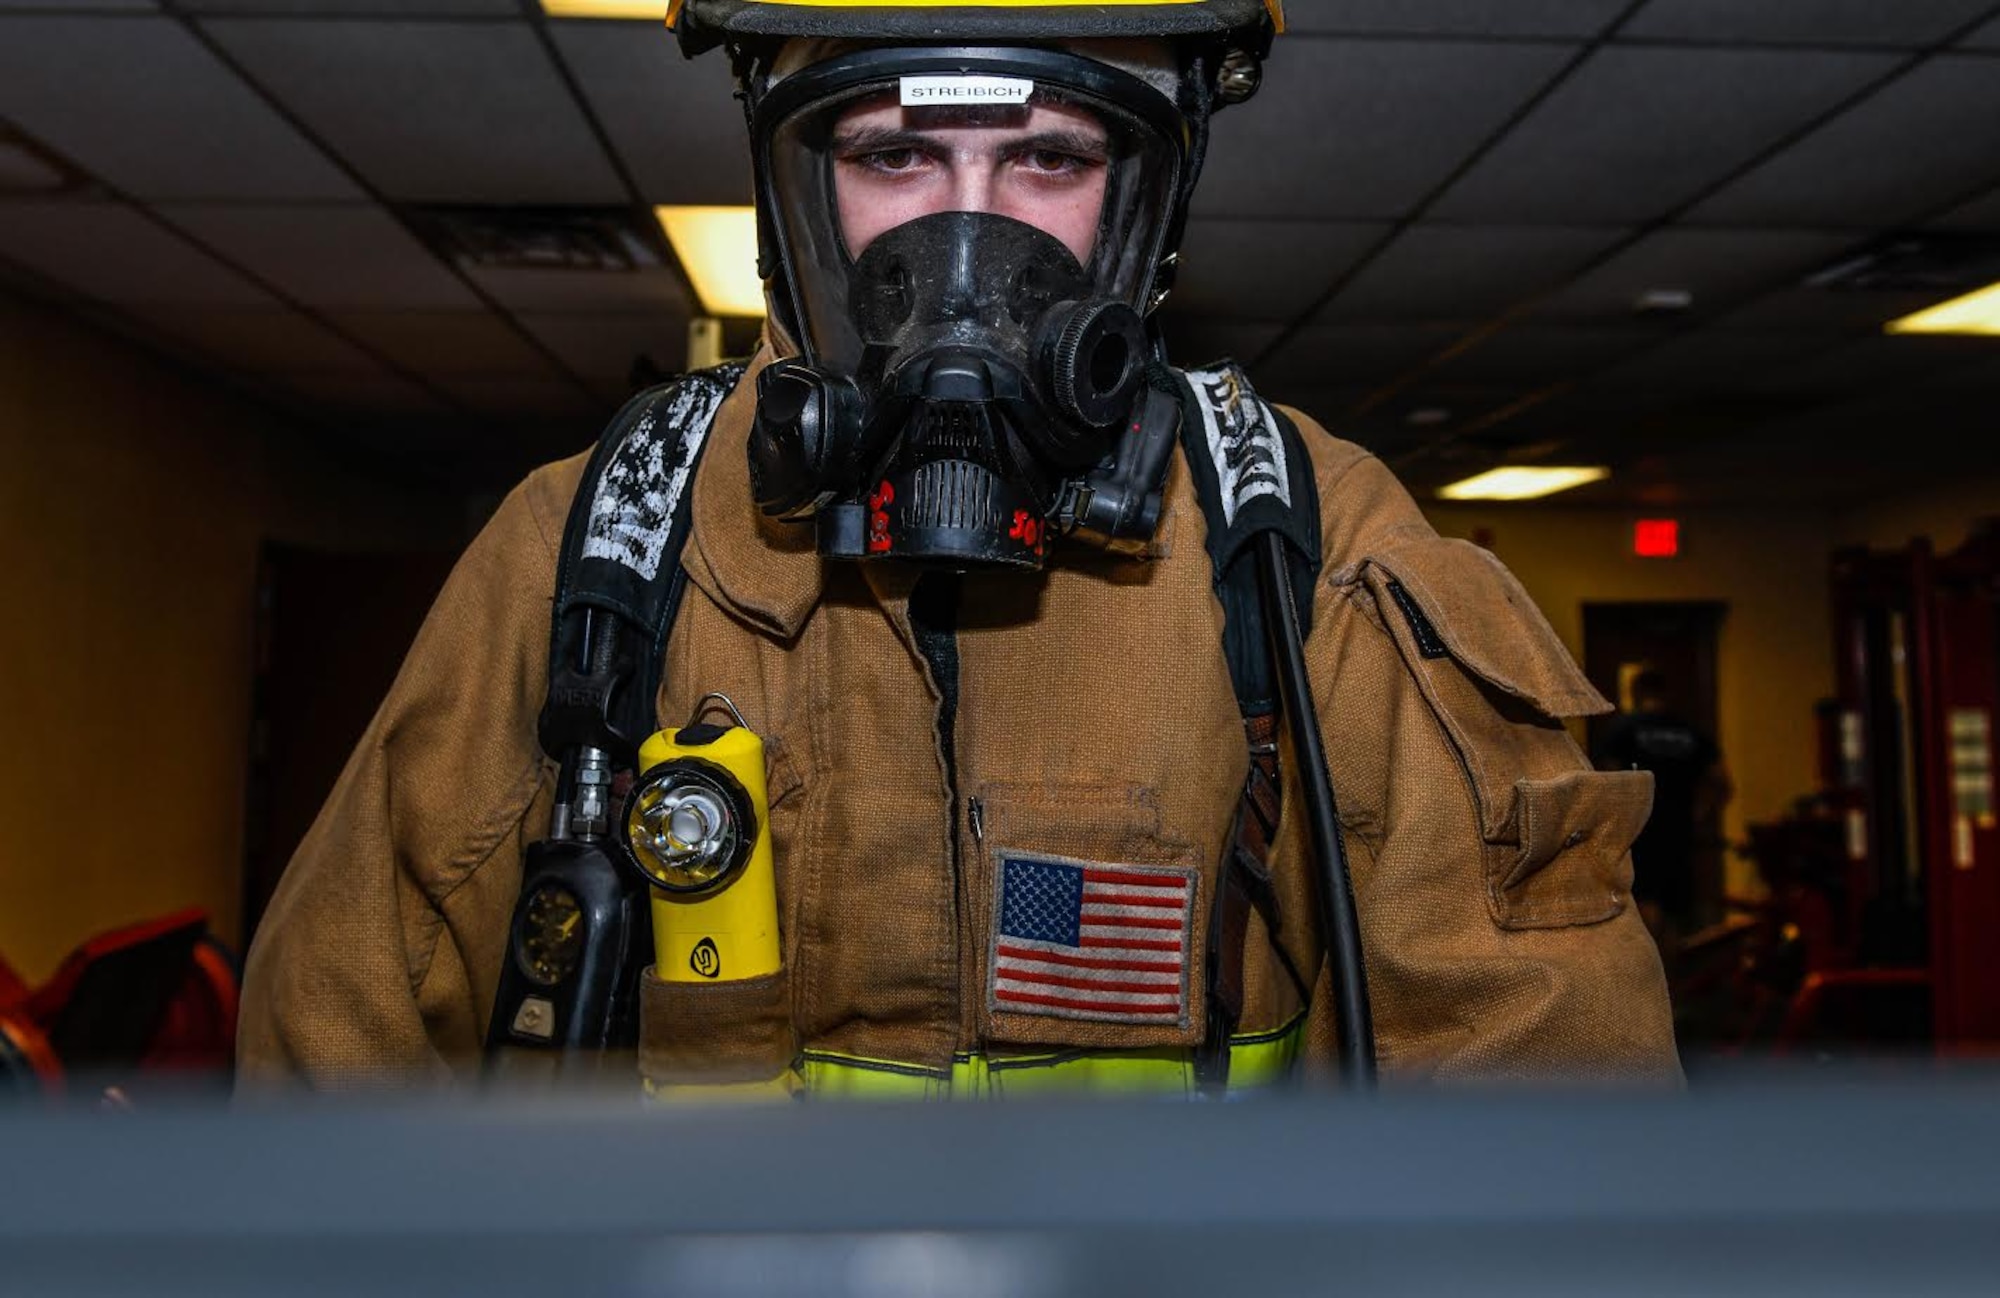 Airman 1st Class Jarrod Streibich, 56th Civil Engineer Squadron firefighter, exercises on a treadmill in full turnout gear Dec. 8, 2019, at the Luke Air Force Base Fire Department, Ariz.